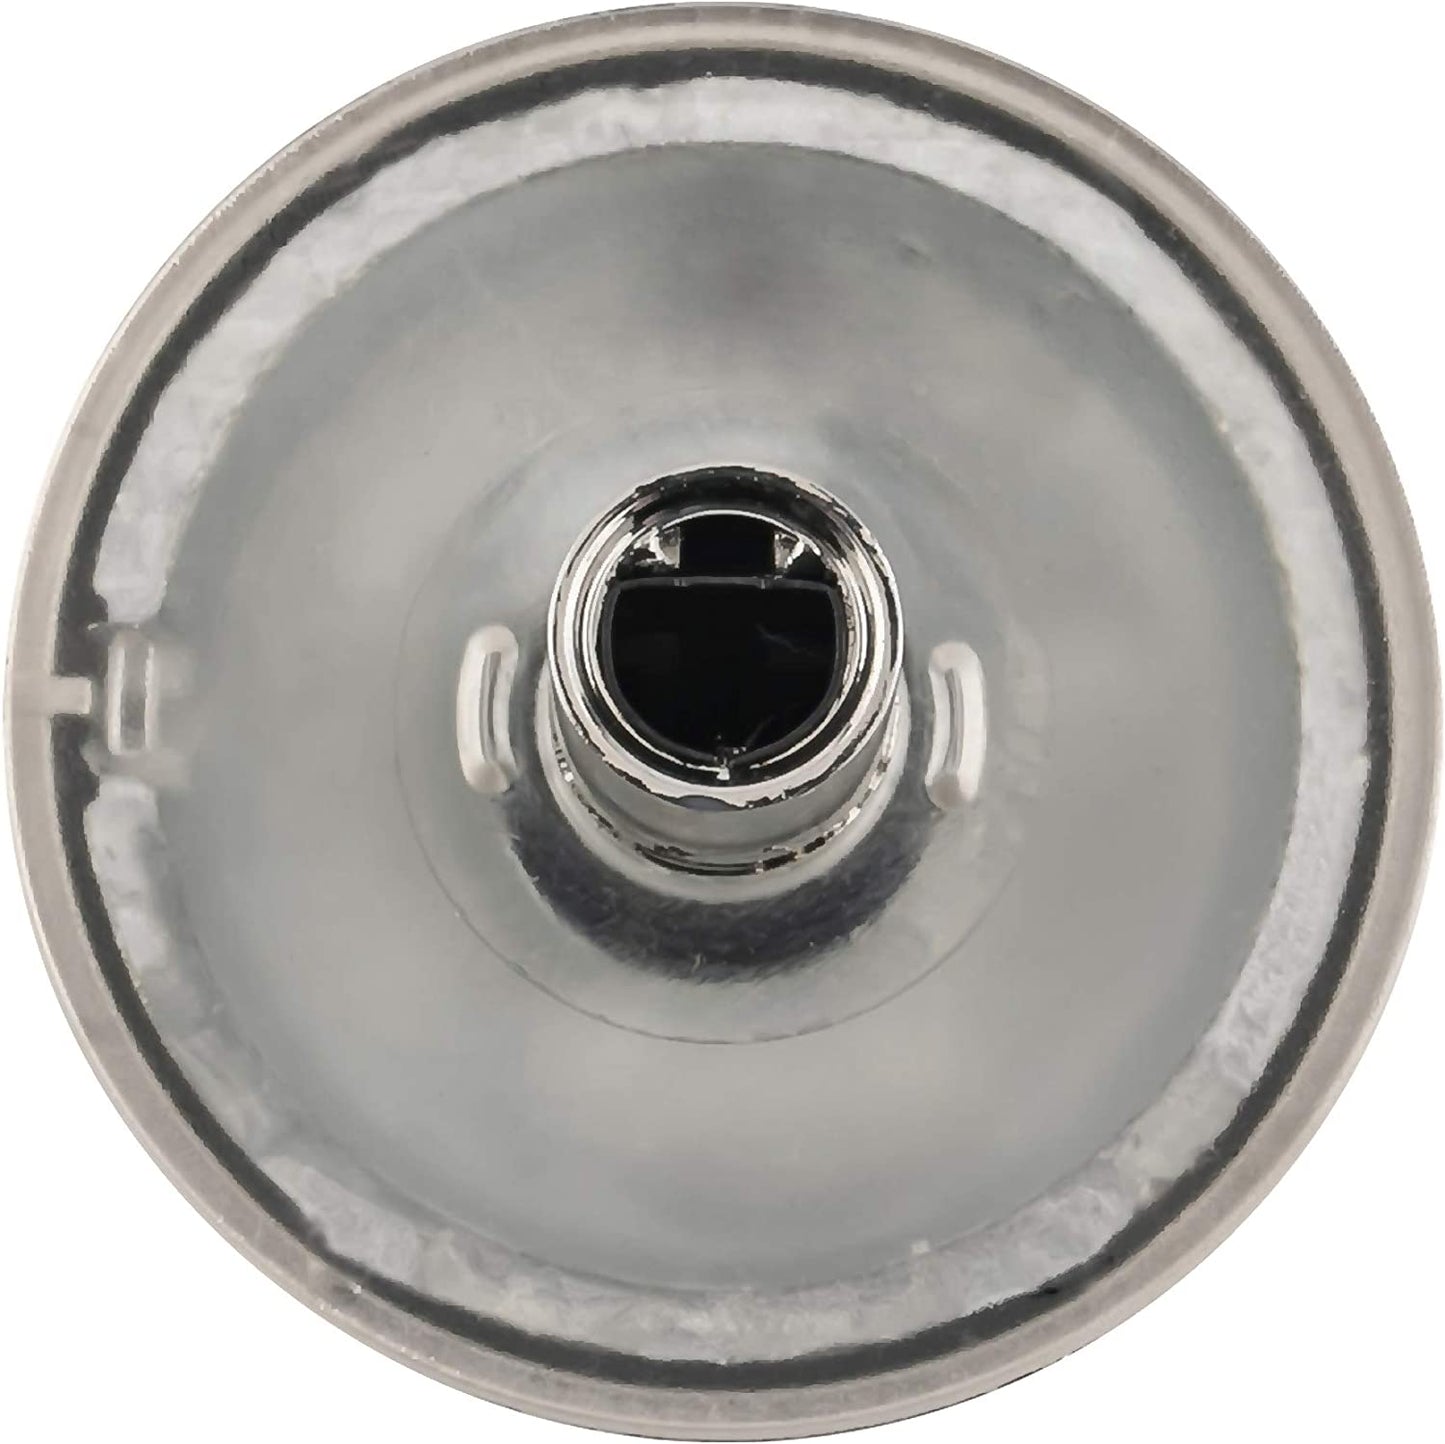 WB03X25889 Knob Compatible with General Electric Stove/Range